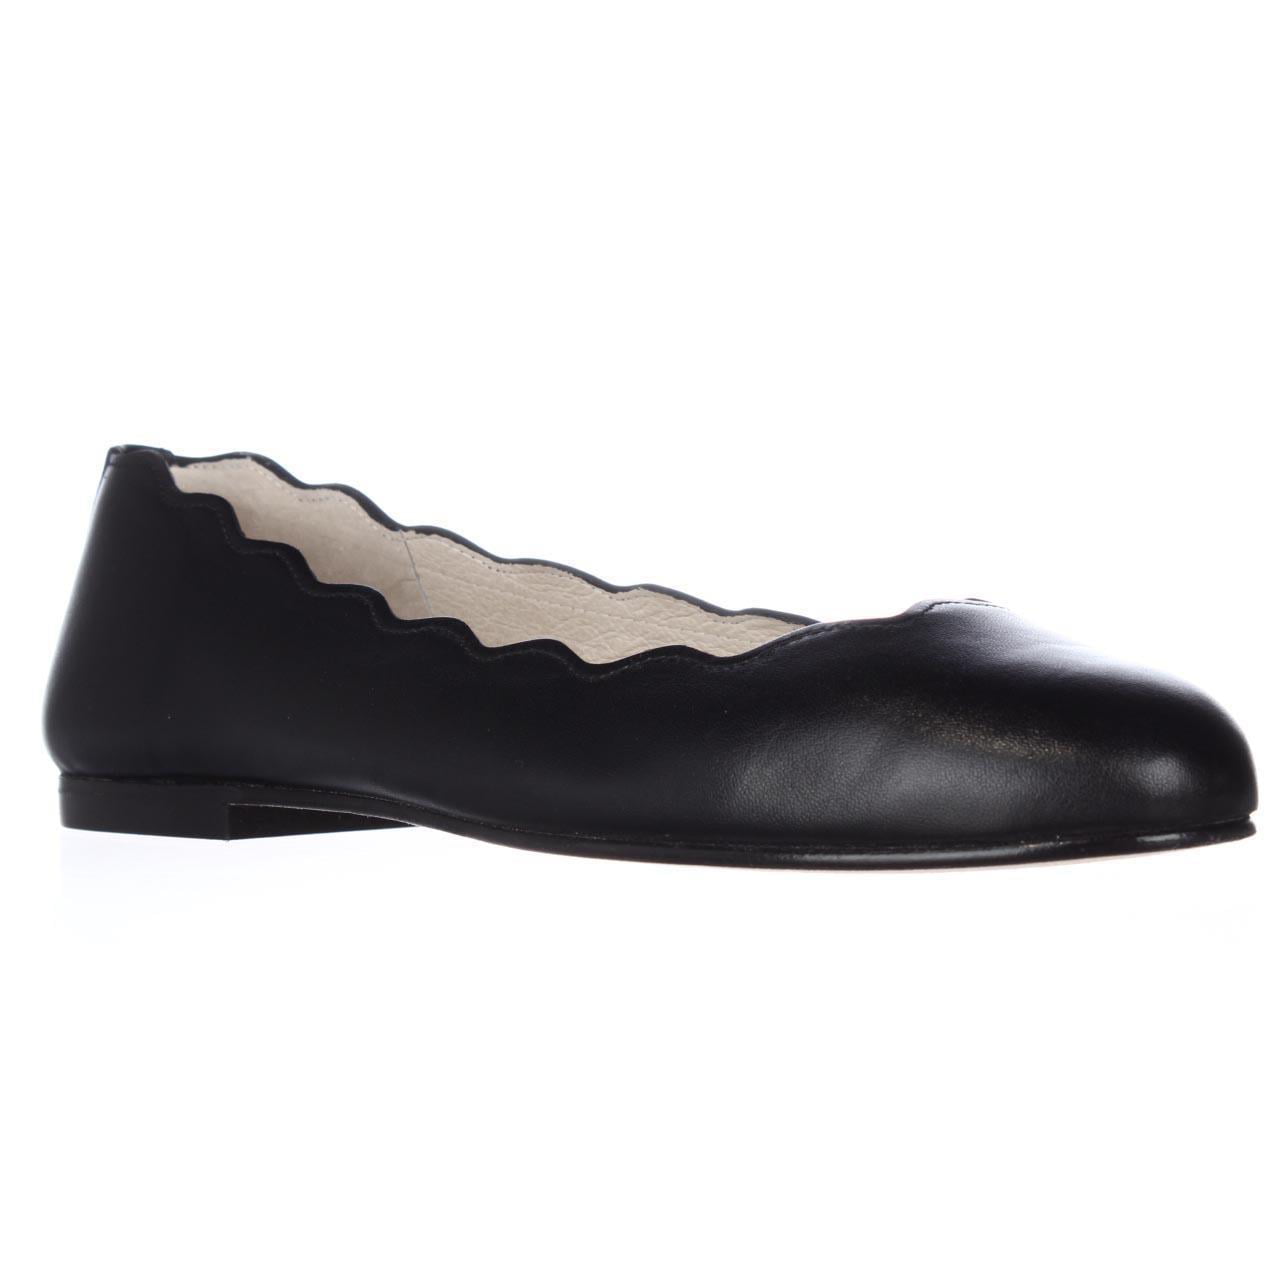 French Sole - French Sole FS/NY Womens Diverse Wedge Pump 